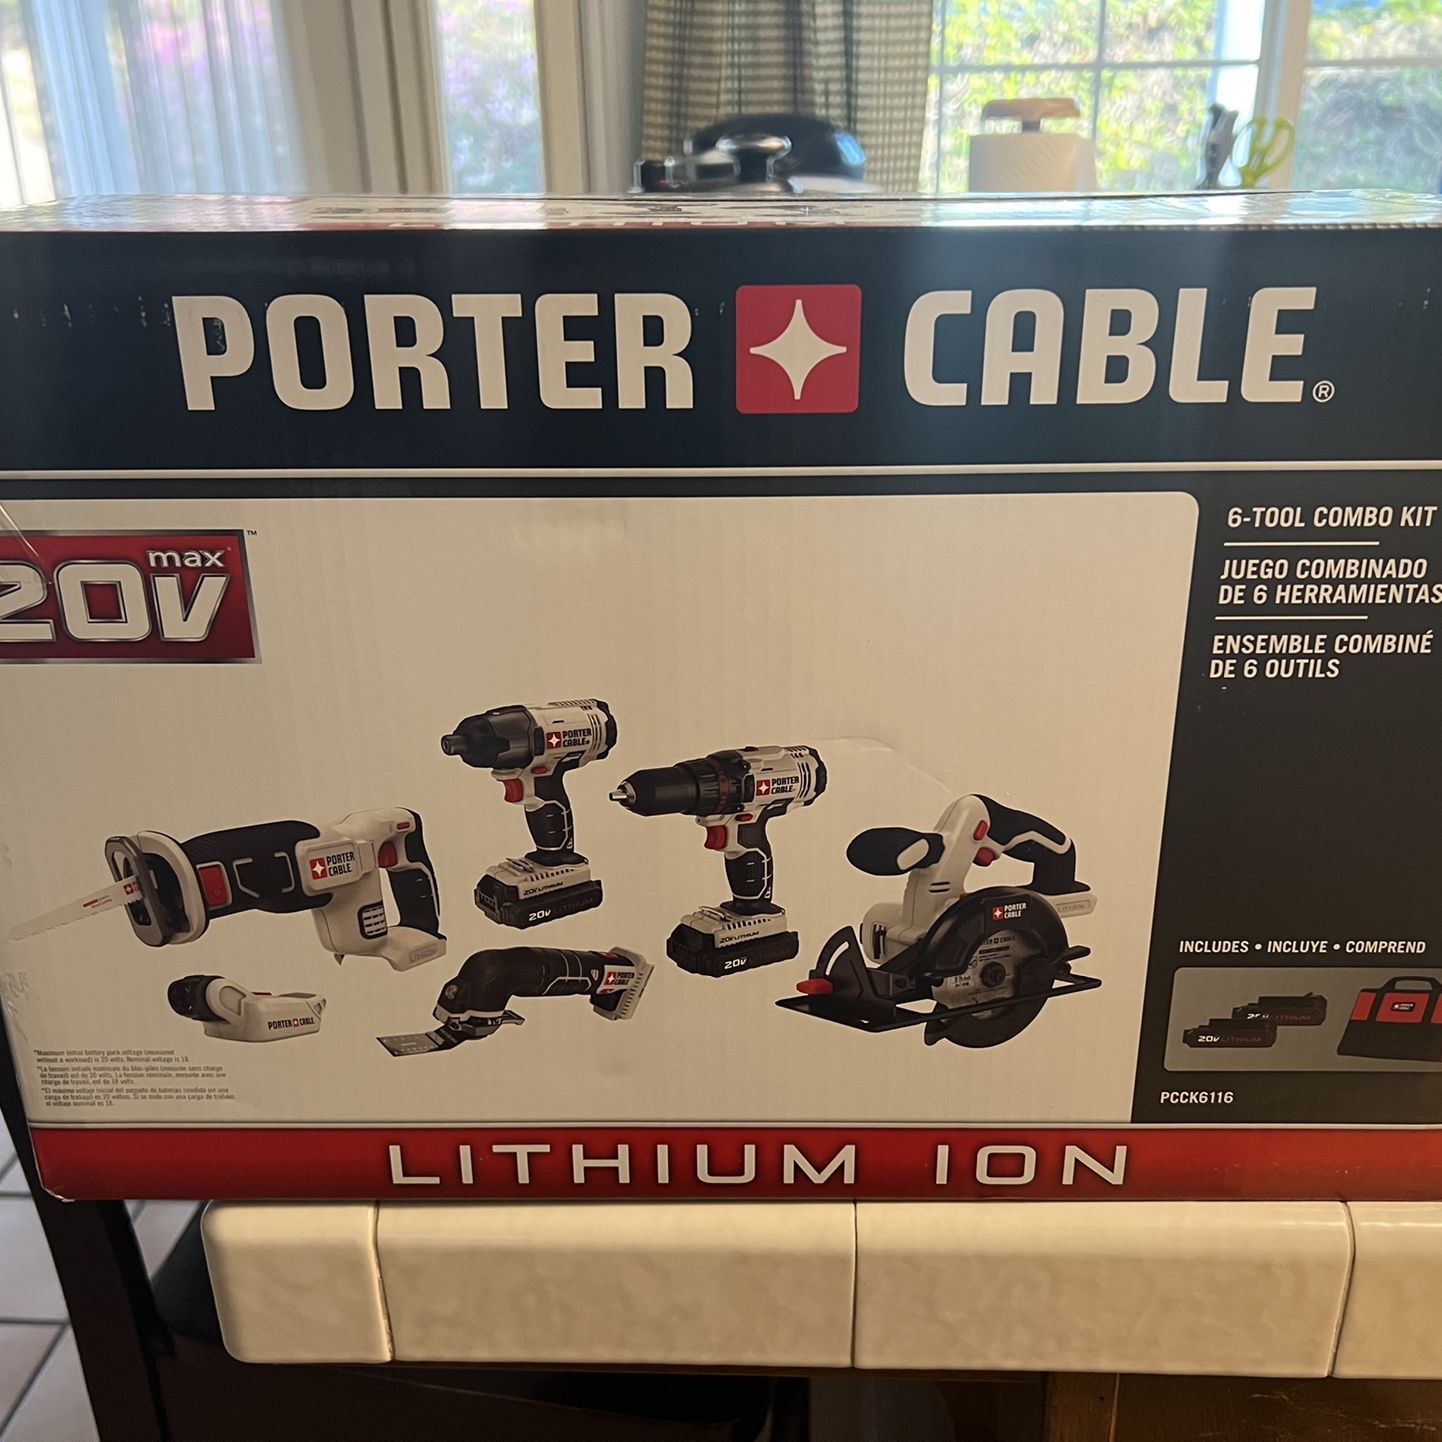 Porter Cable Tool Combo Kit 20V Max for Sale in City Of Industry, CA  OfferUp